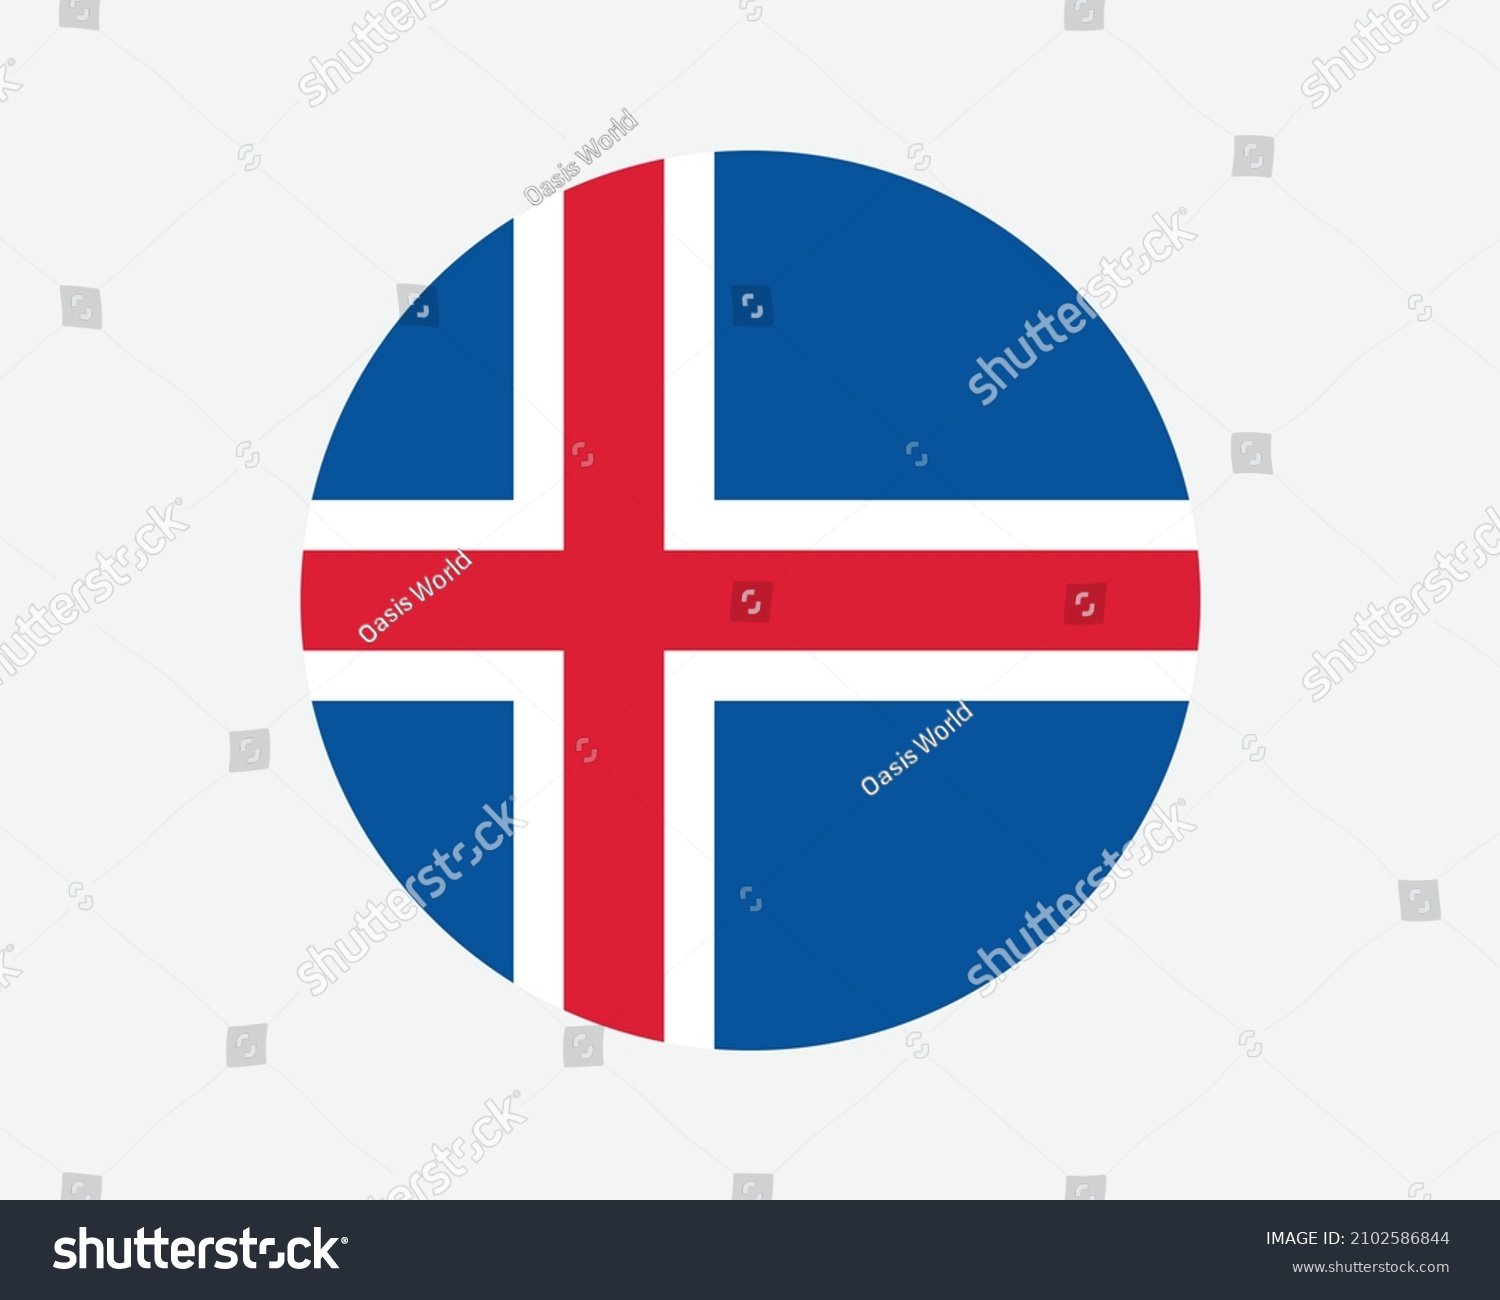 SVG of Iceland Round Country Flag. Icelandic Circle National Flag. Iceland Circular Shape Button Banner. EPS Vector Illustration. svg